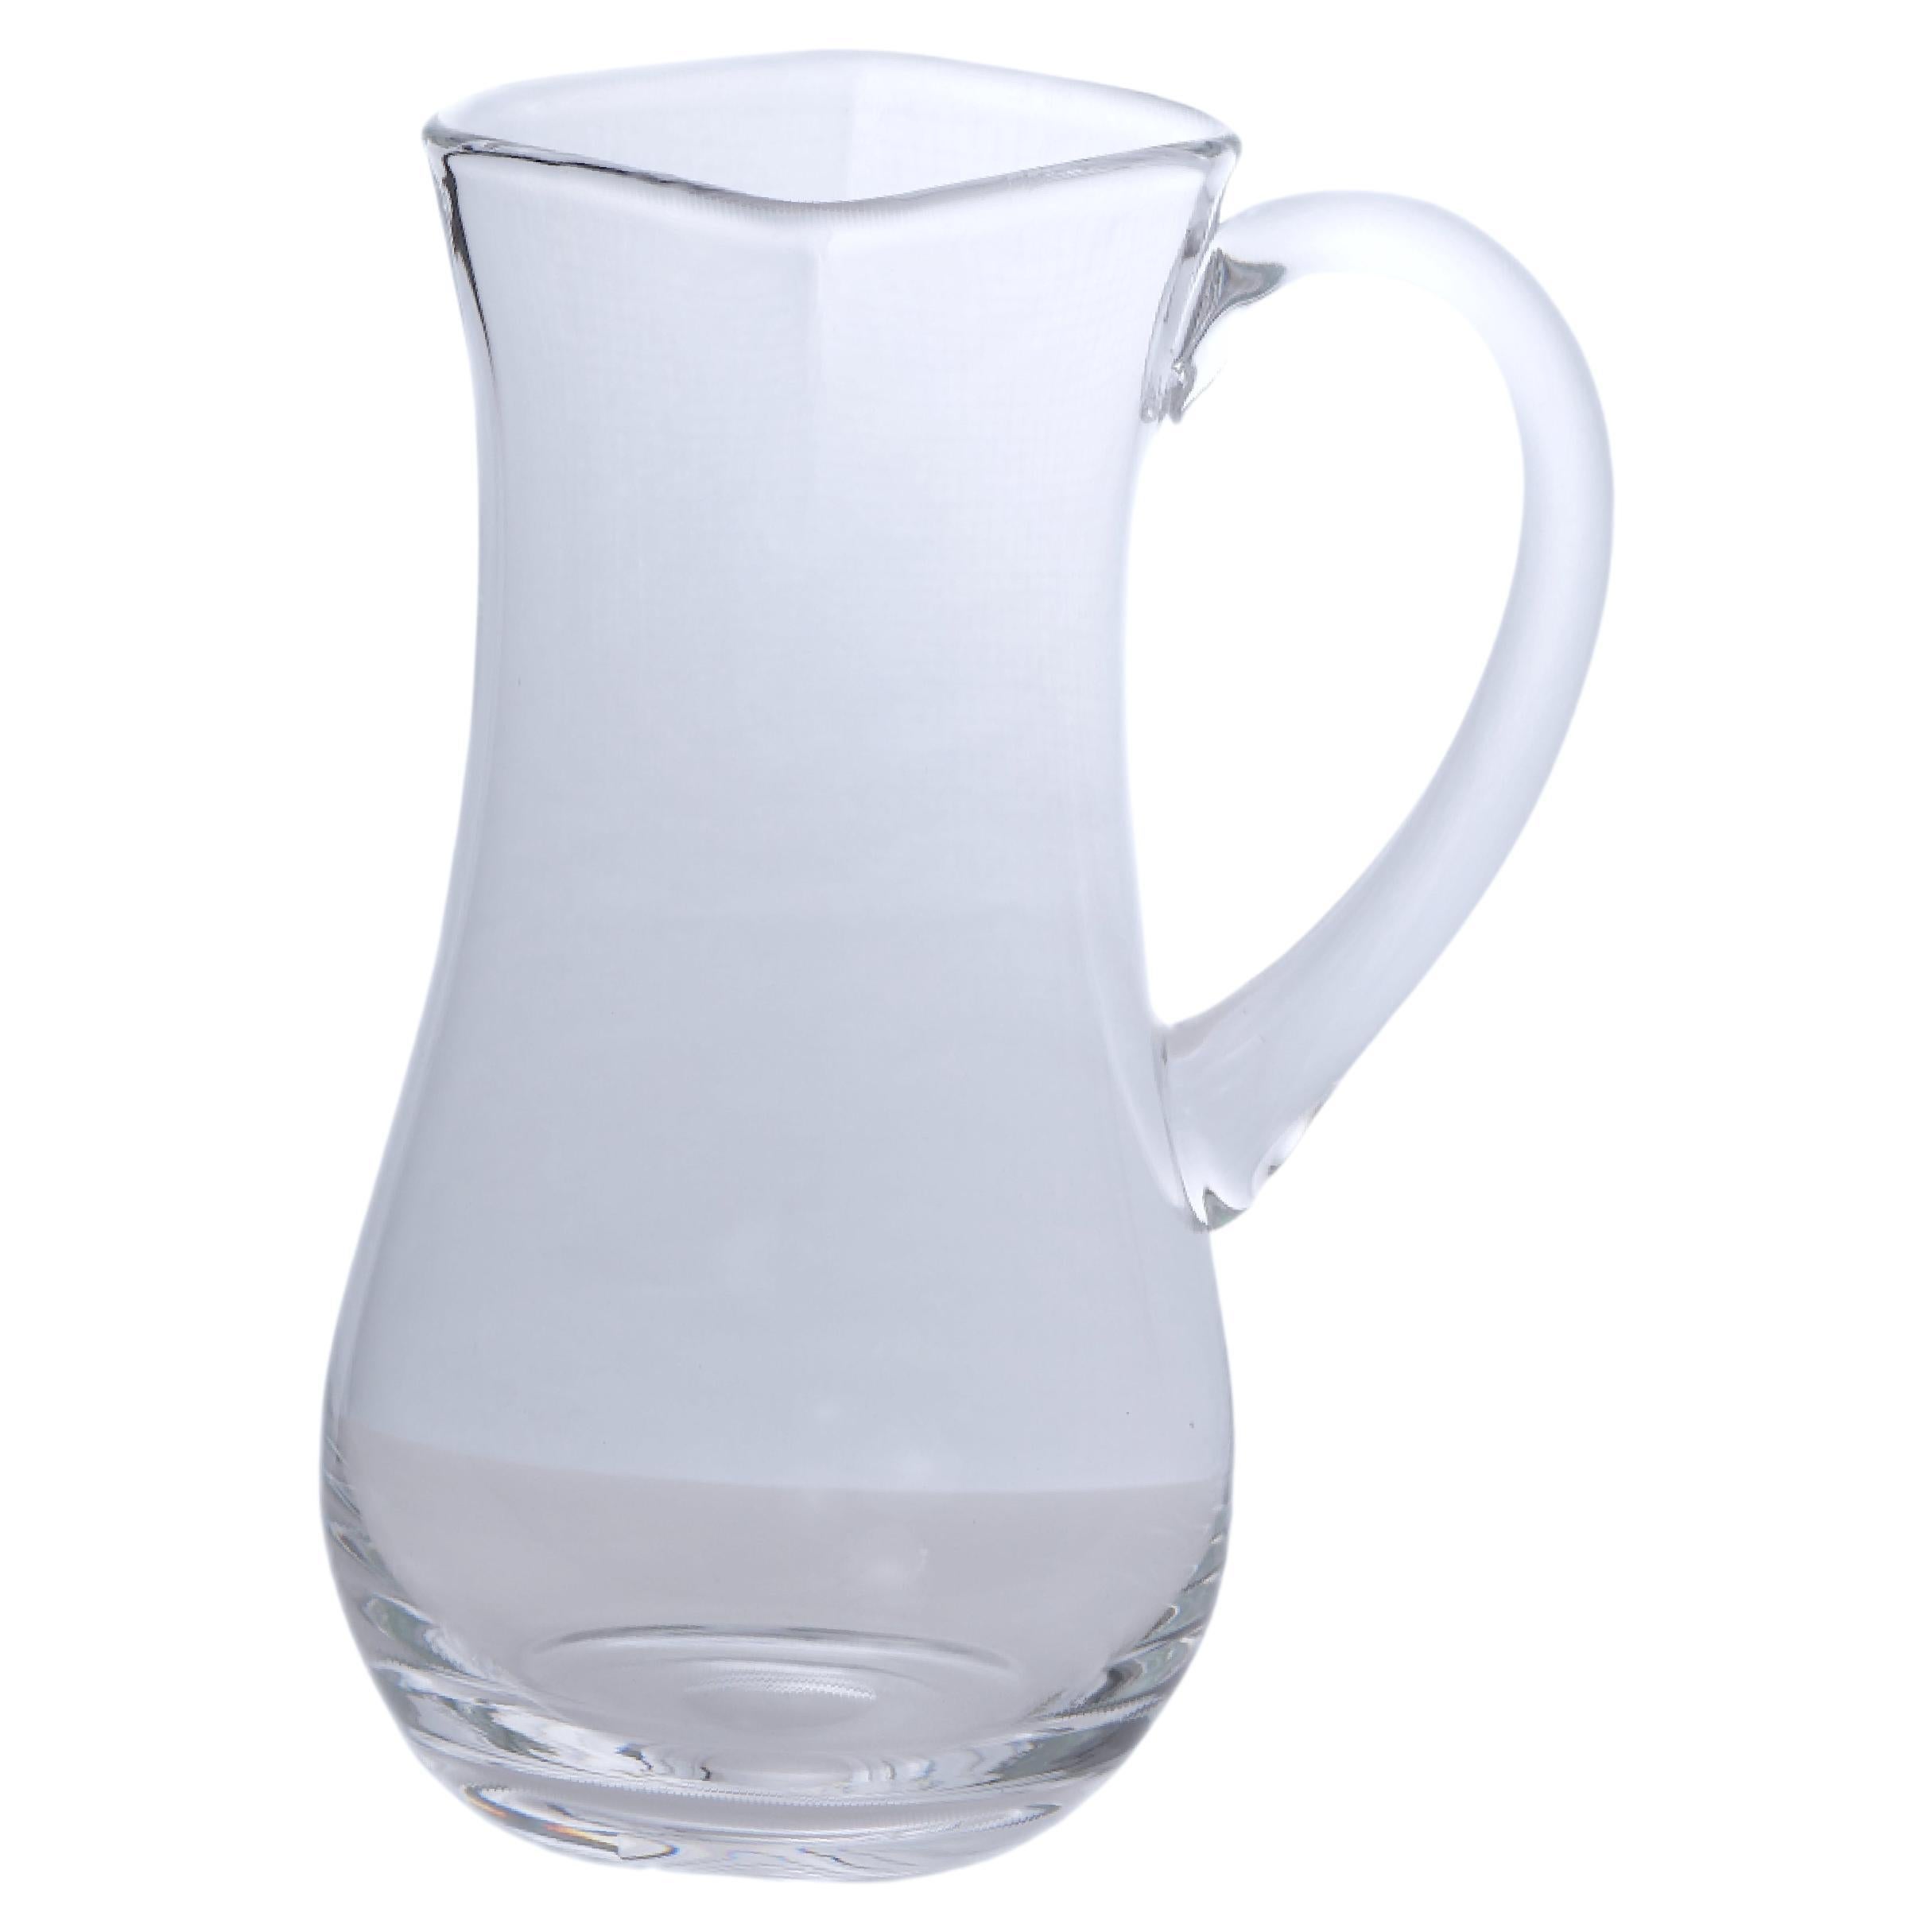 Mid-Century Modern Crystal Barware / Tableware Serving Pitcher For Sale